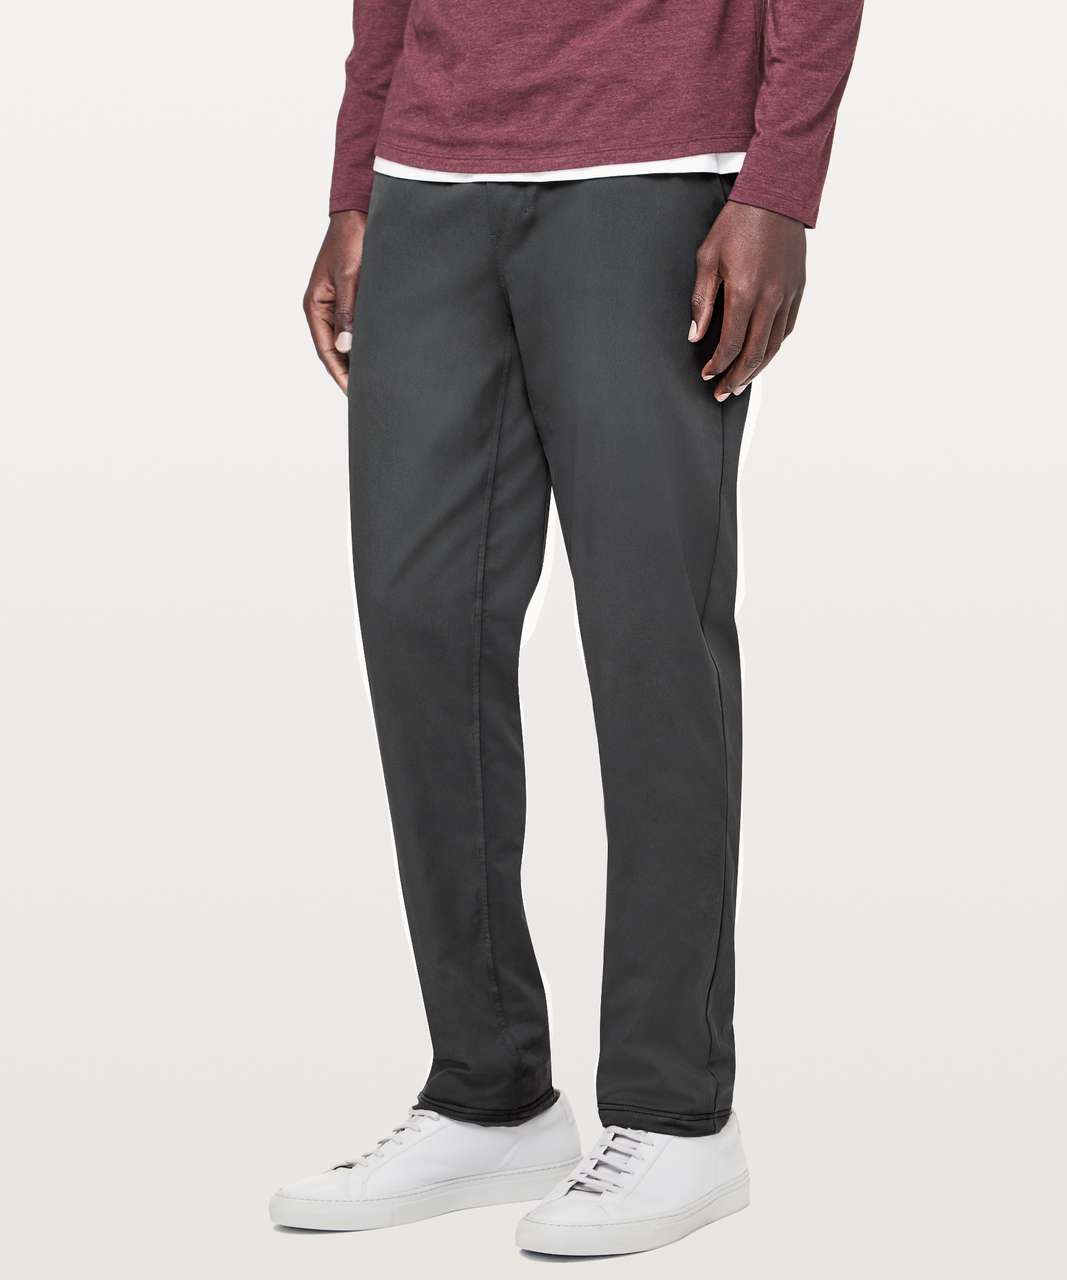 Lululemon Great Wall Pant *Lined 32" - Obsidian